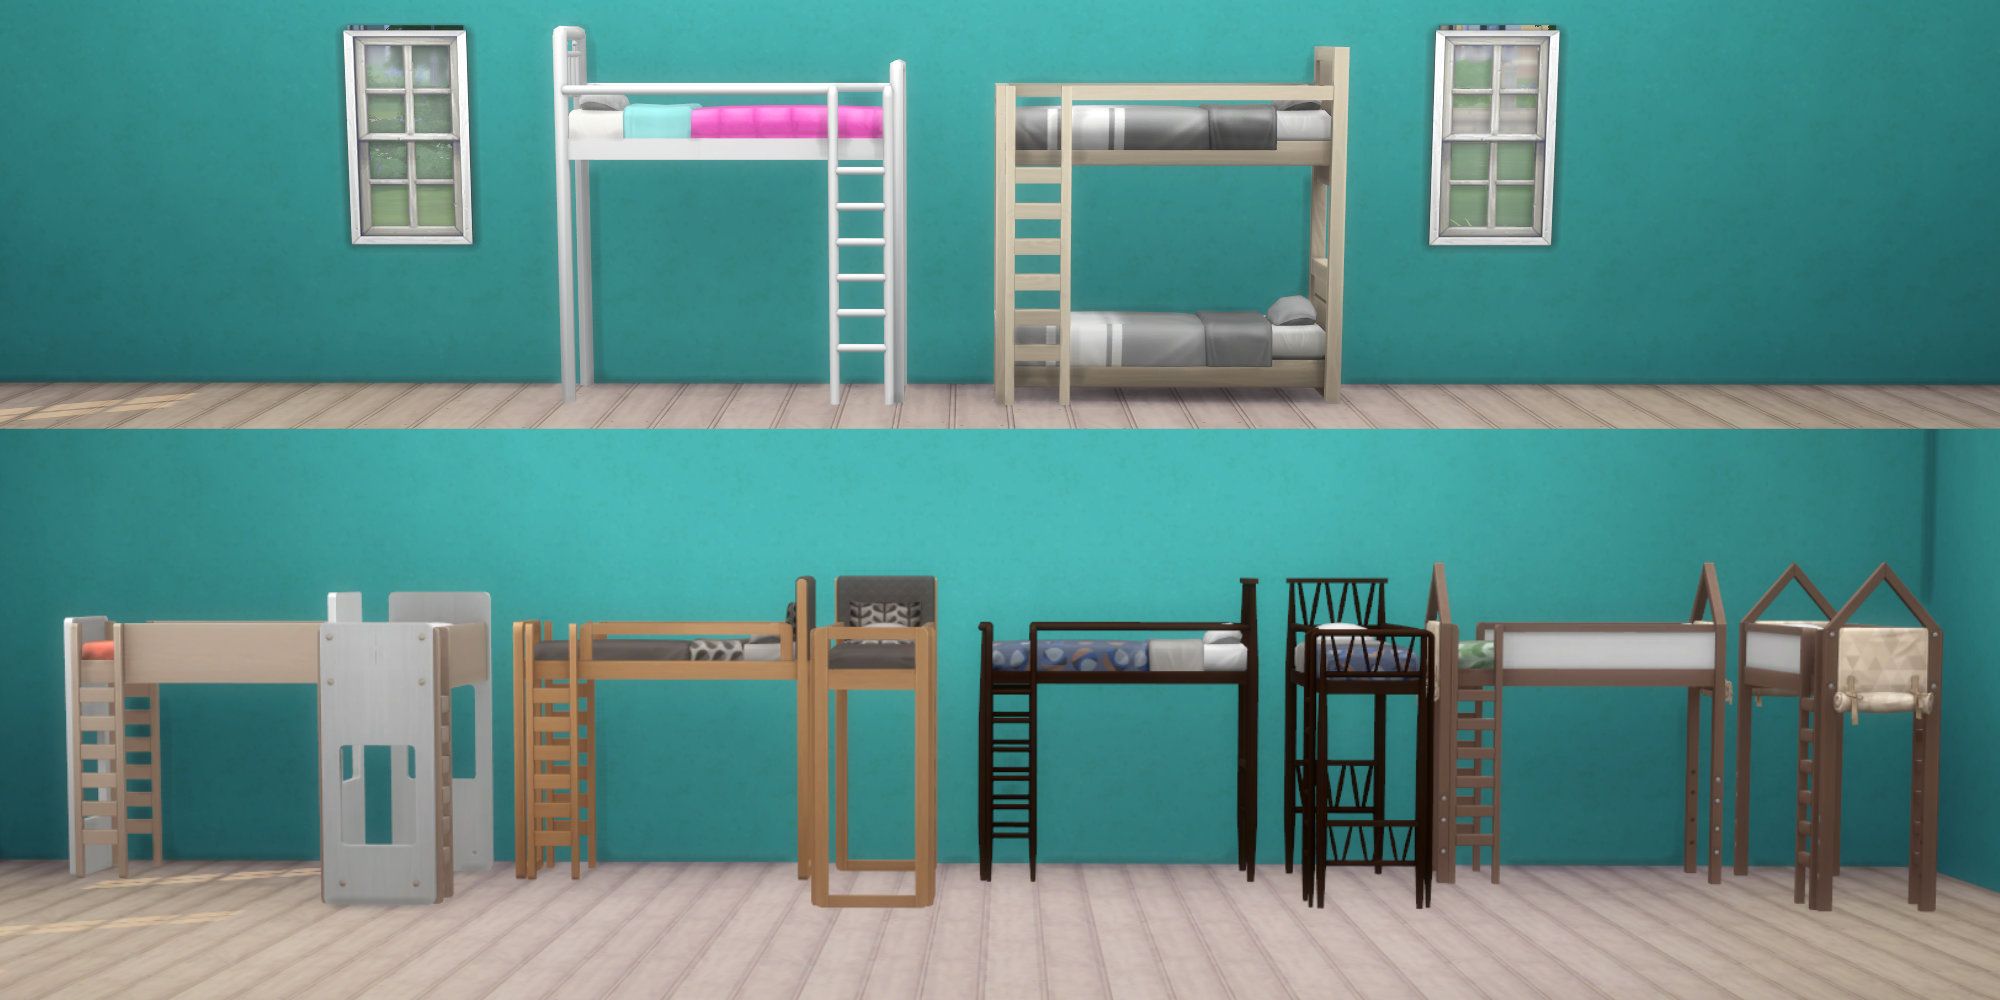 Sims 4 all bunks in game